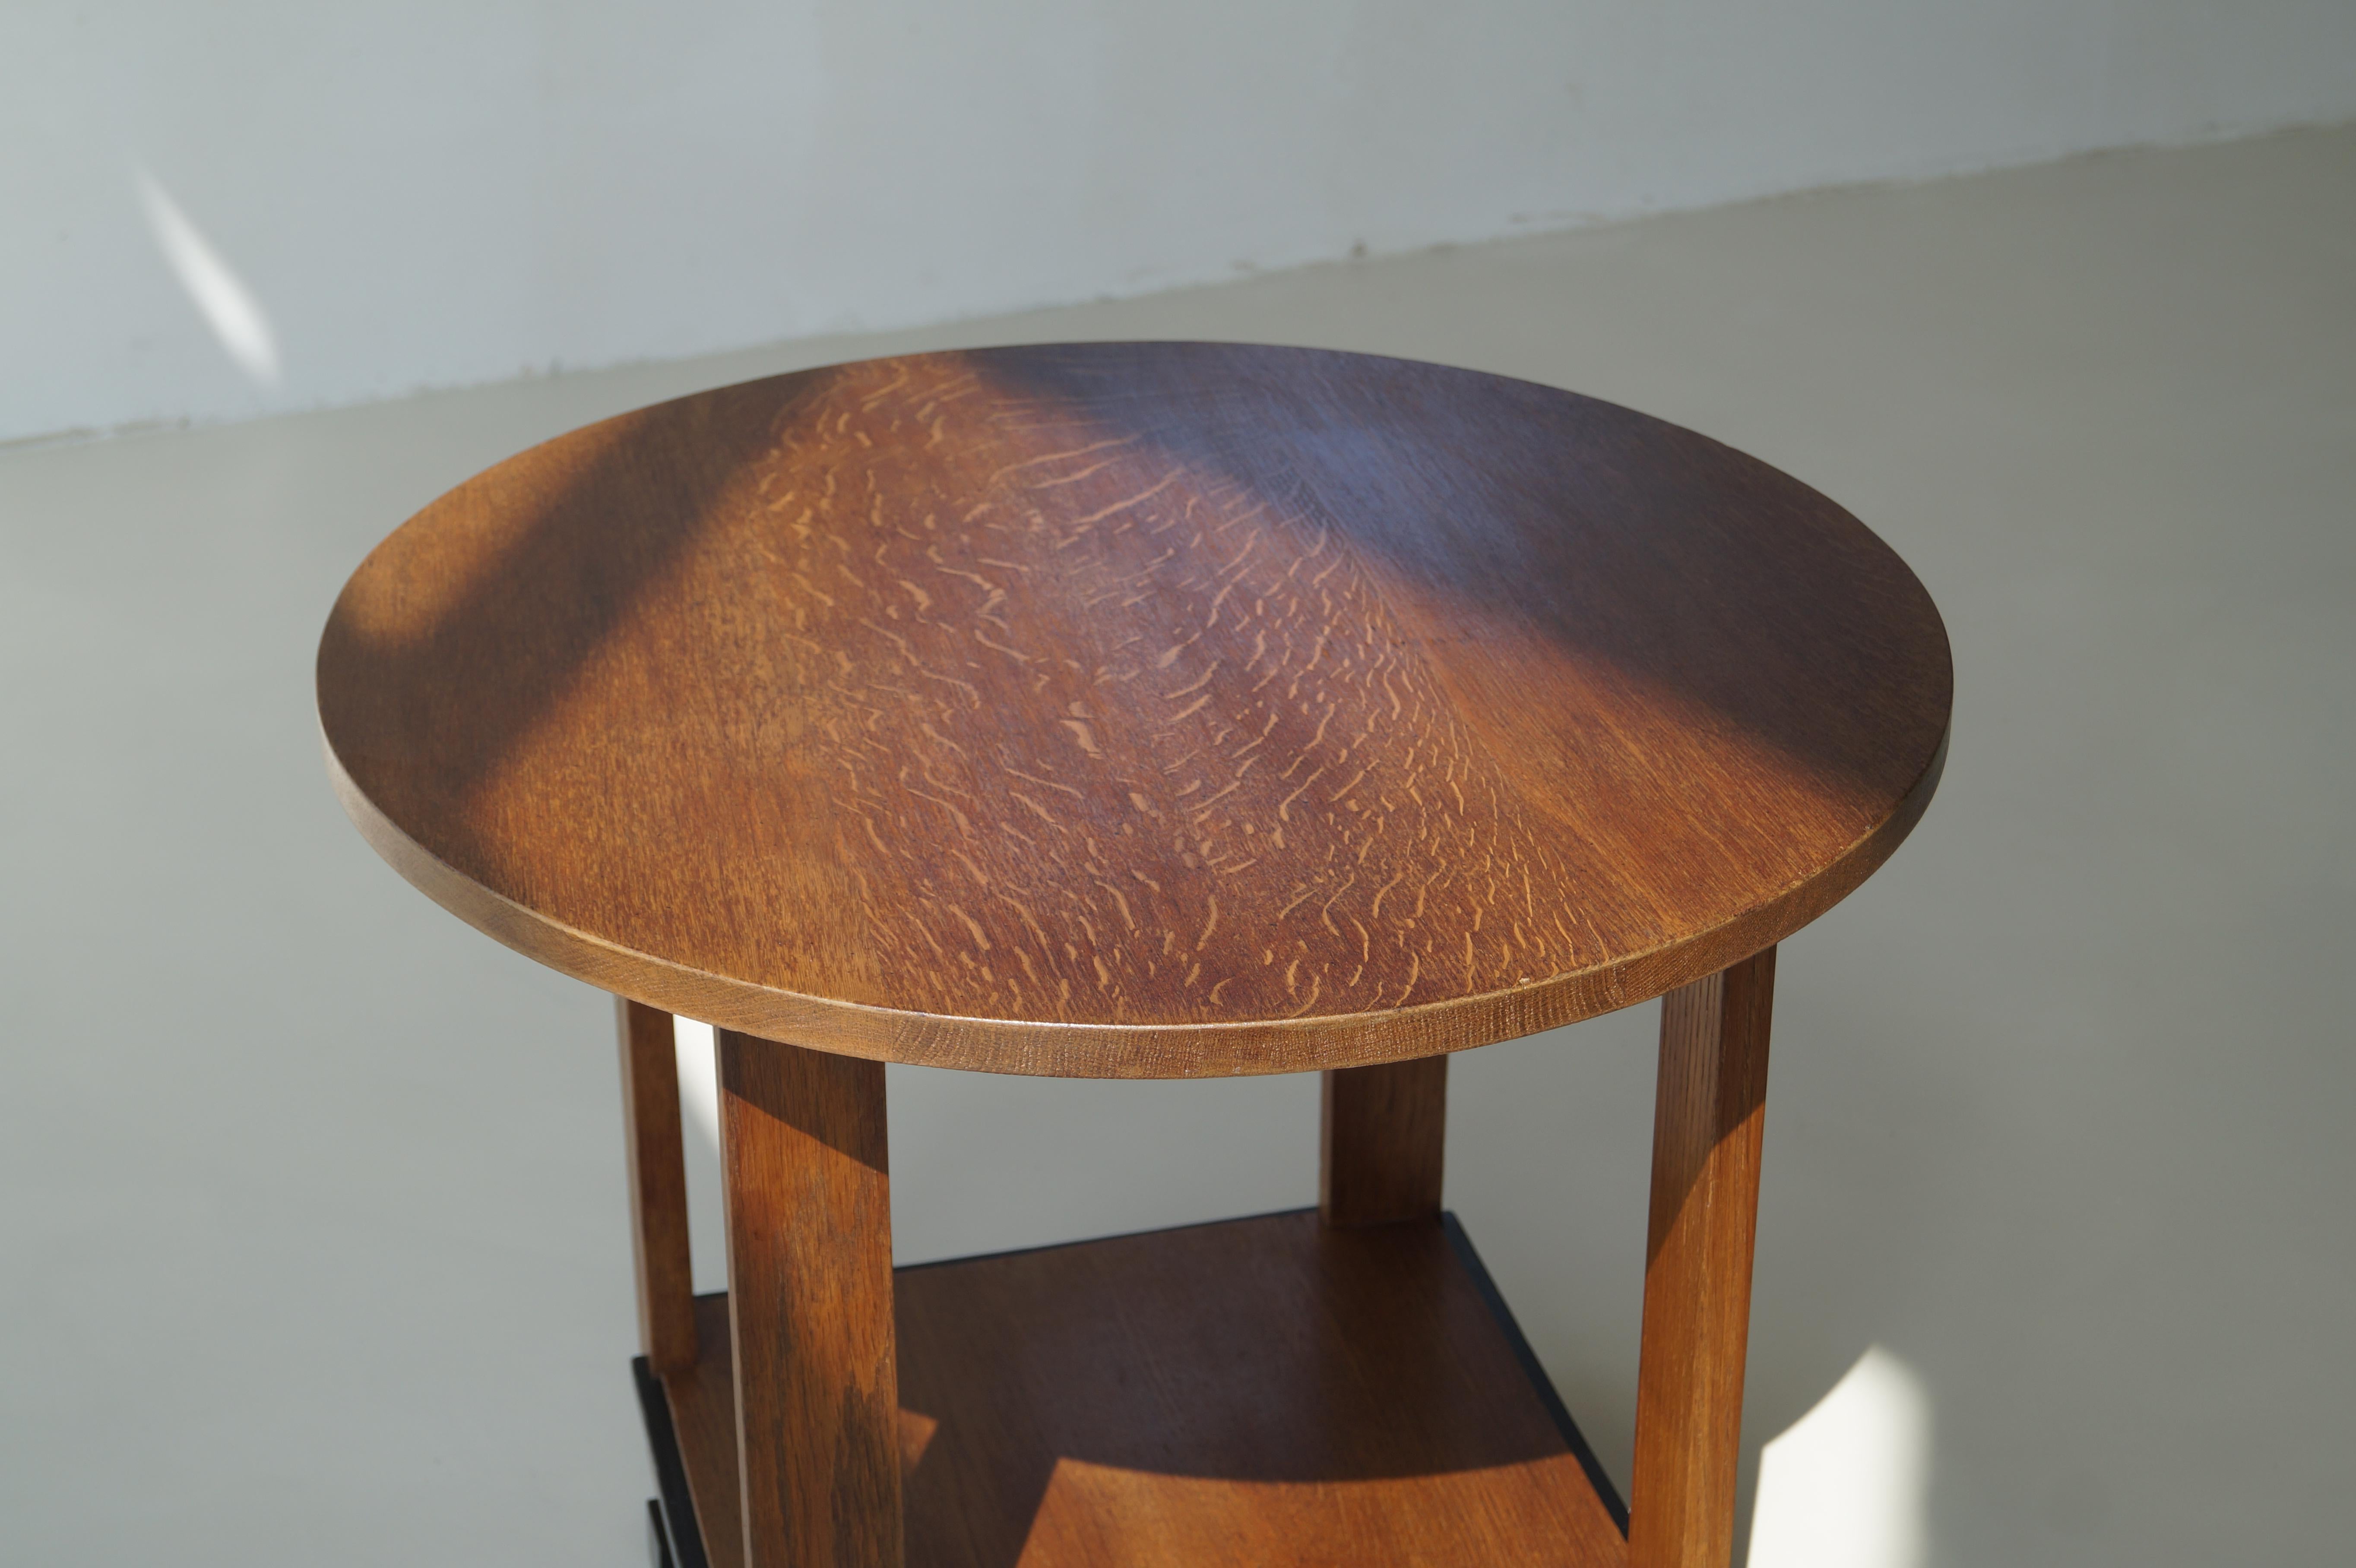 Modernist Dutch Art Deco occasional table attributed to Jan Brunott, 1920s For Sale 3